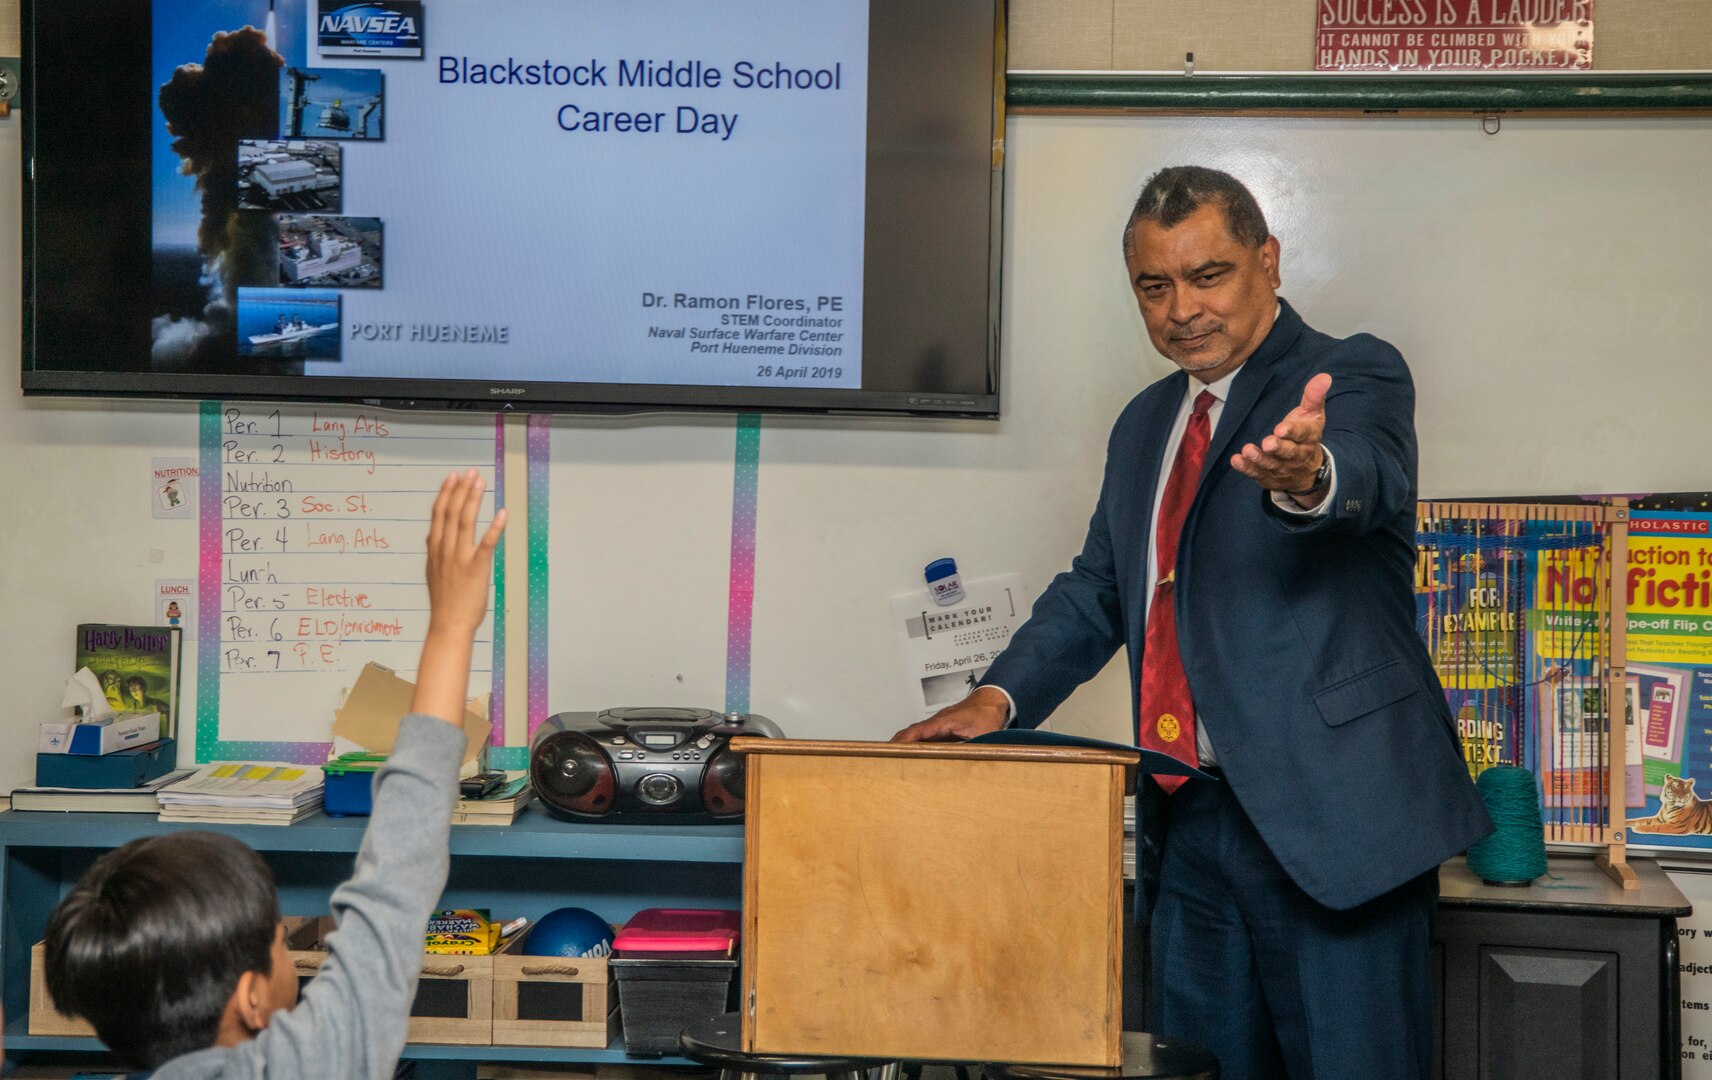 Ramon Flores, the science technology engineering and mathematics (STEM) coordinator at Naval Surface Warfare Center, Port Hueneme Division gives a presentation to students at Blackstock Middle School as part of a career day event, April 26.